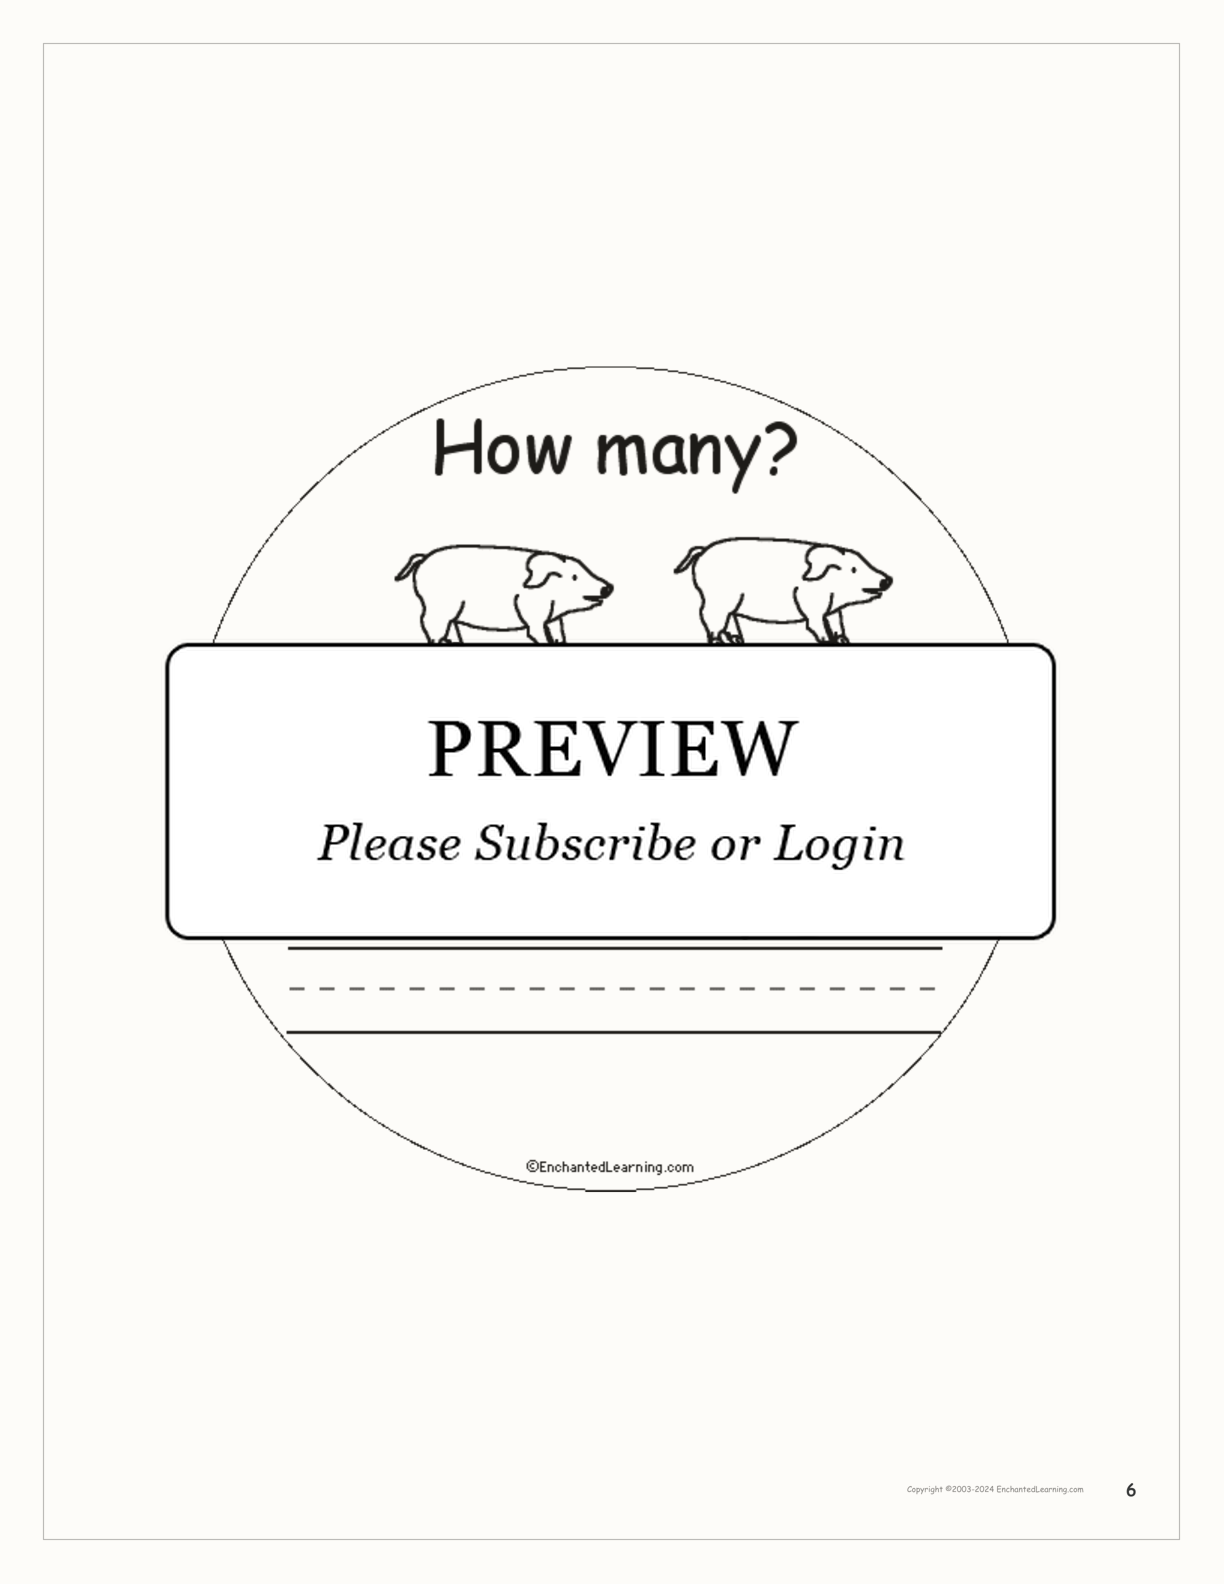 How Many Farm Animals? Book for Early Readers interactive printout page 6